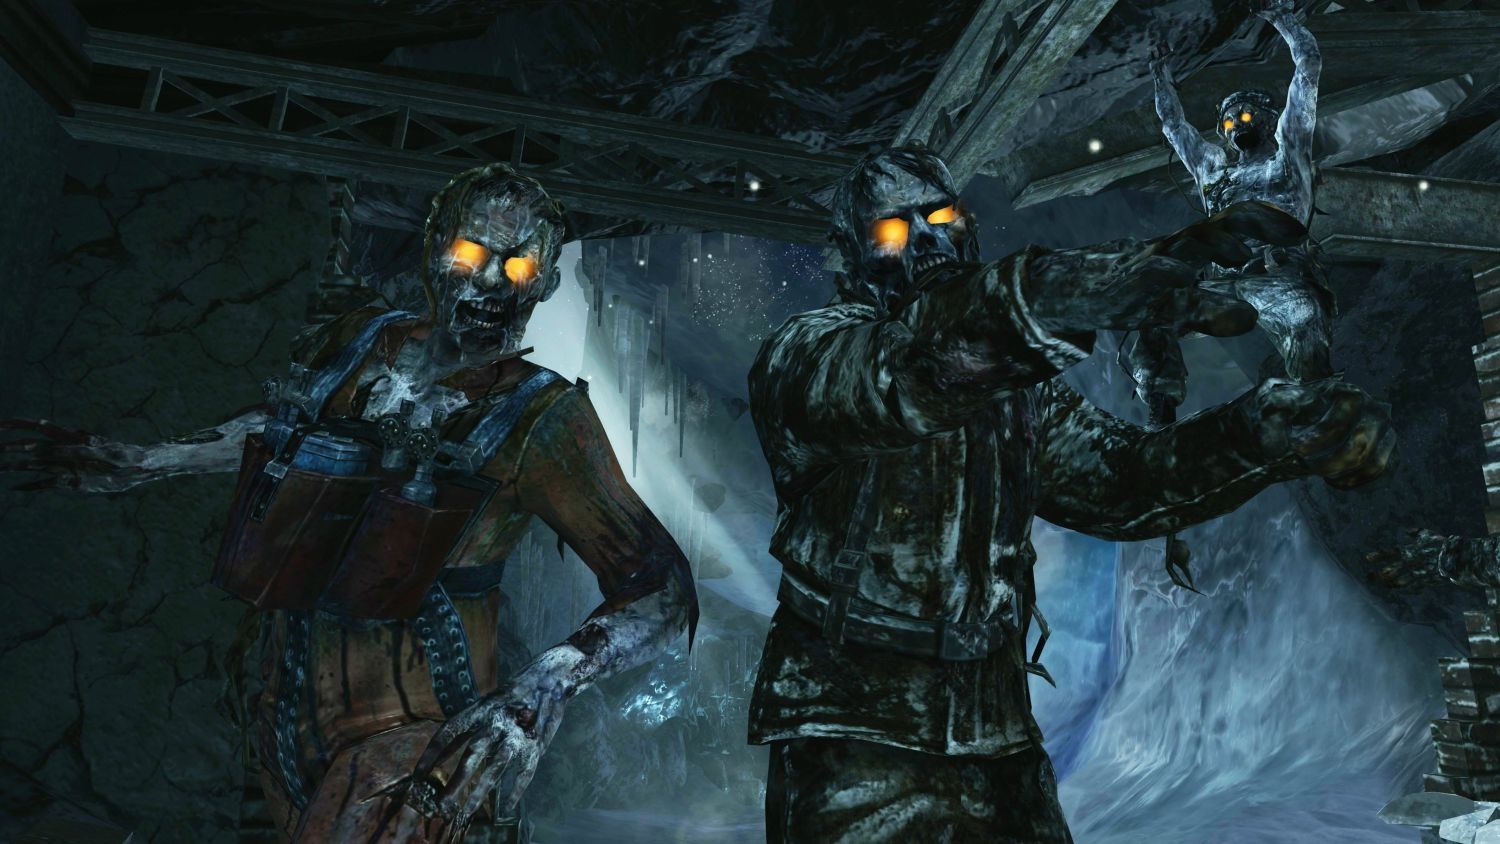 Call of Duty Black Ops - Escalation DLC - Image 16